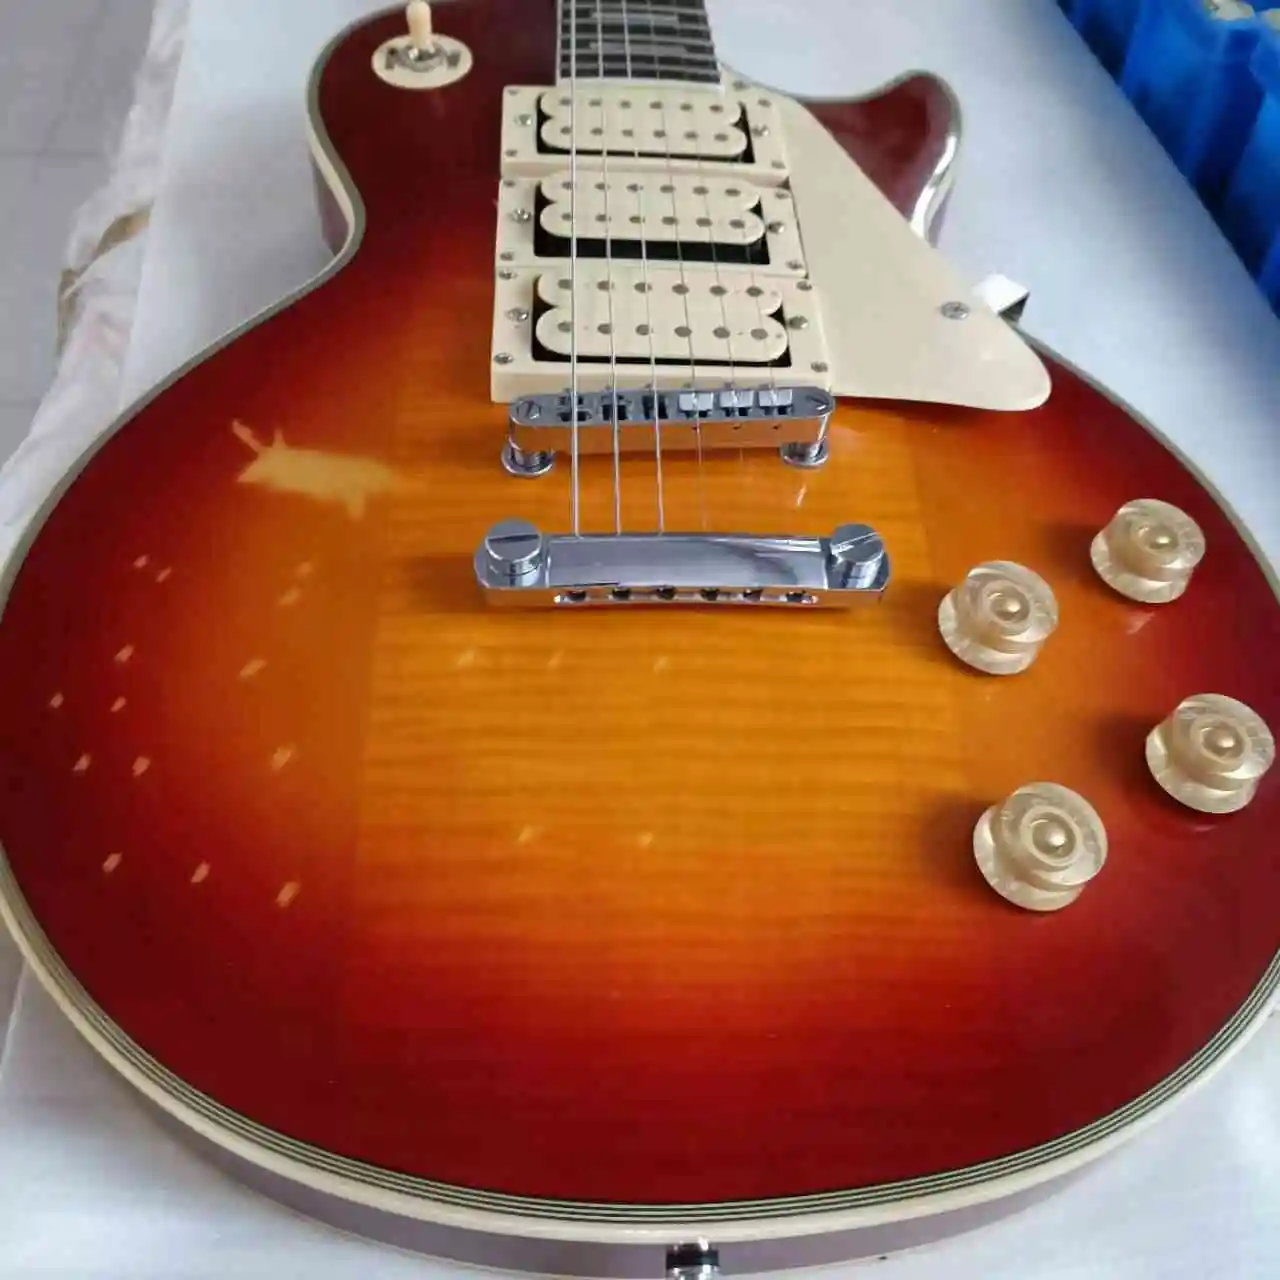 

Ace Frehley Heritage Cherry Sunburst Relic Electric Guitar Tune-o-matic Bridge, Grover Tuners & White Pearloid Banjo Buttons